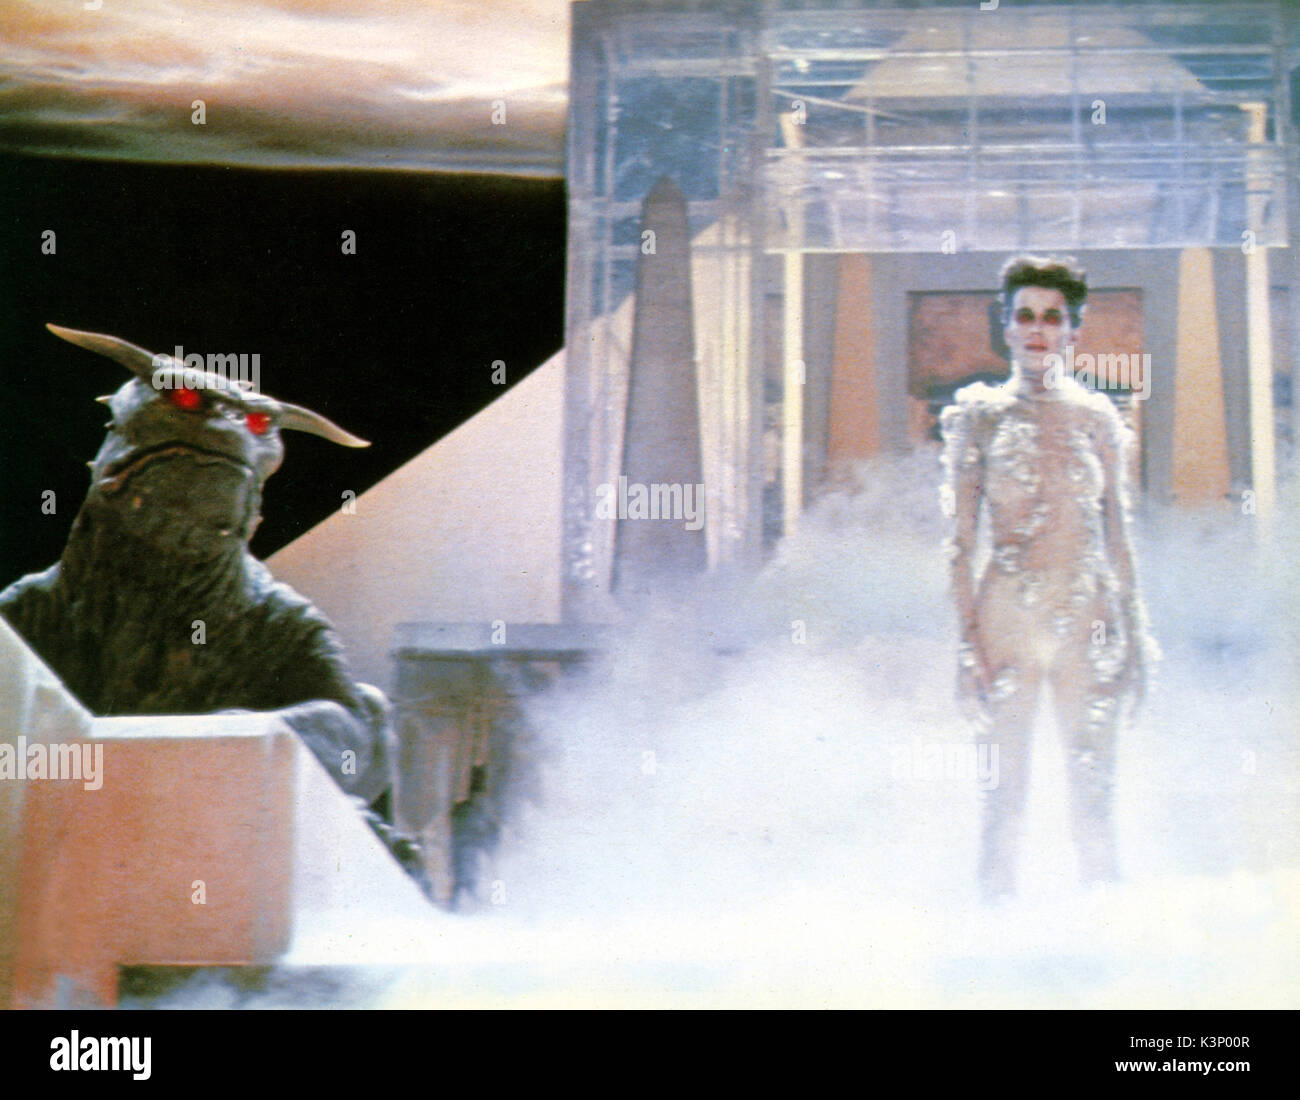 GHOST BUSTERS [US] 1984 aka GHOSTBUSTERS SLAVITZA JOVAN [droit] Date : 1984 Banque D'Images